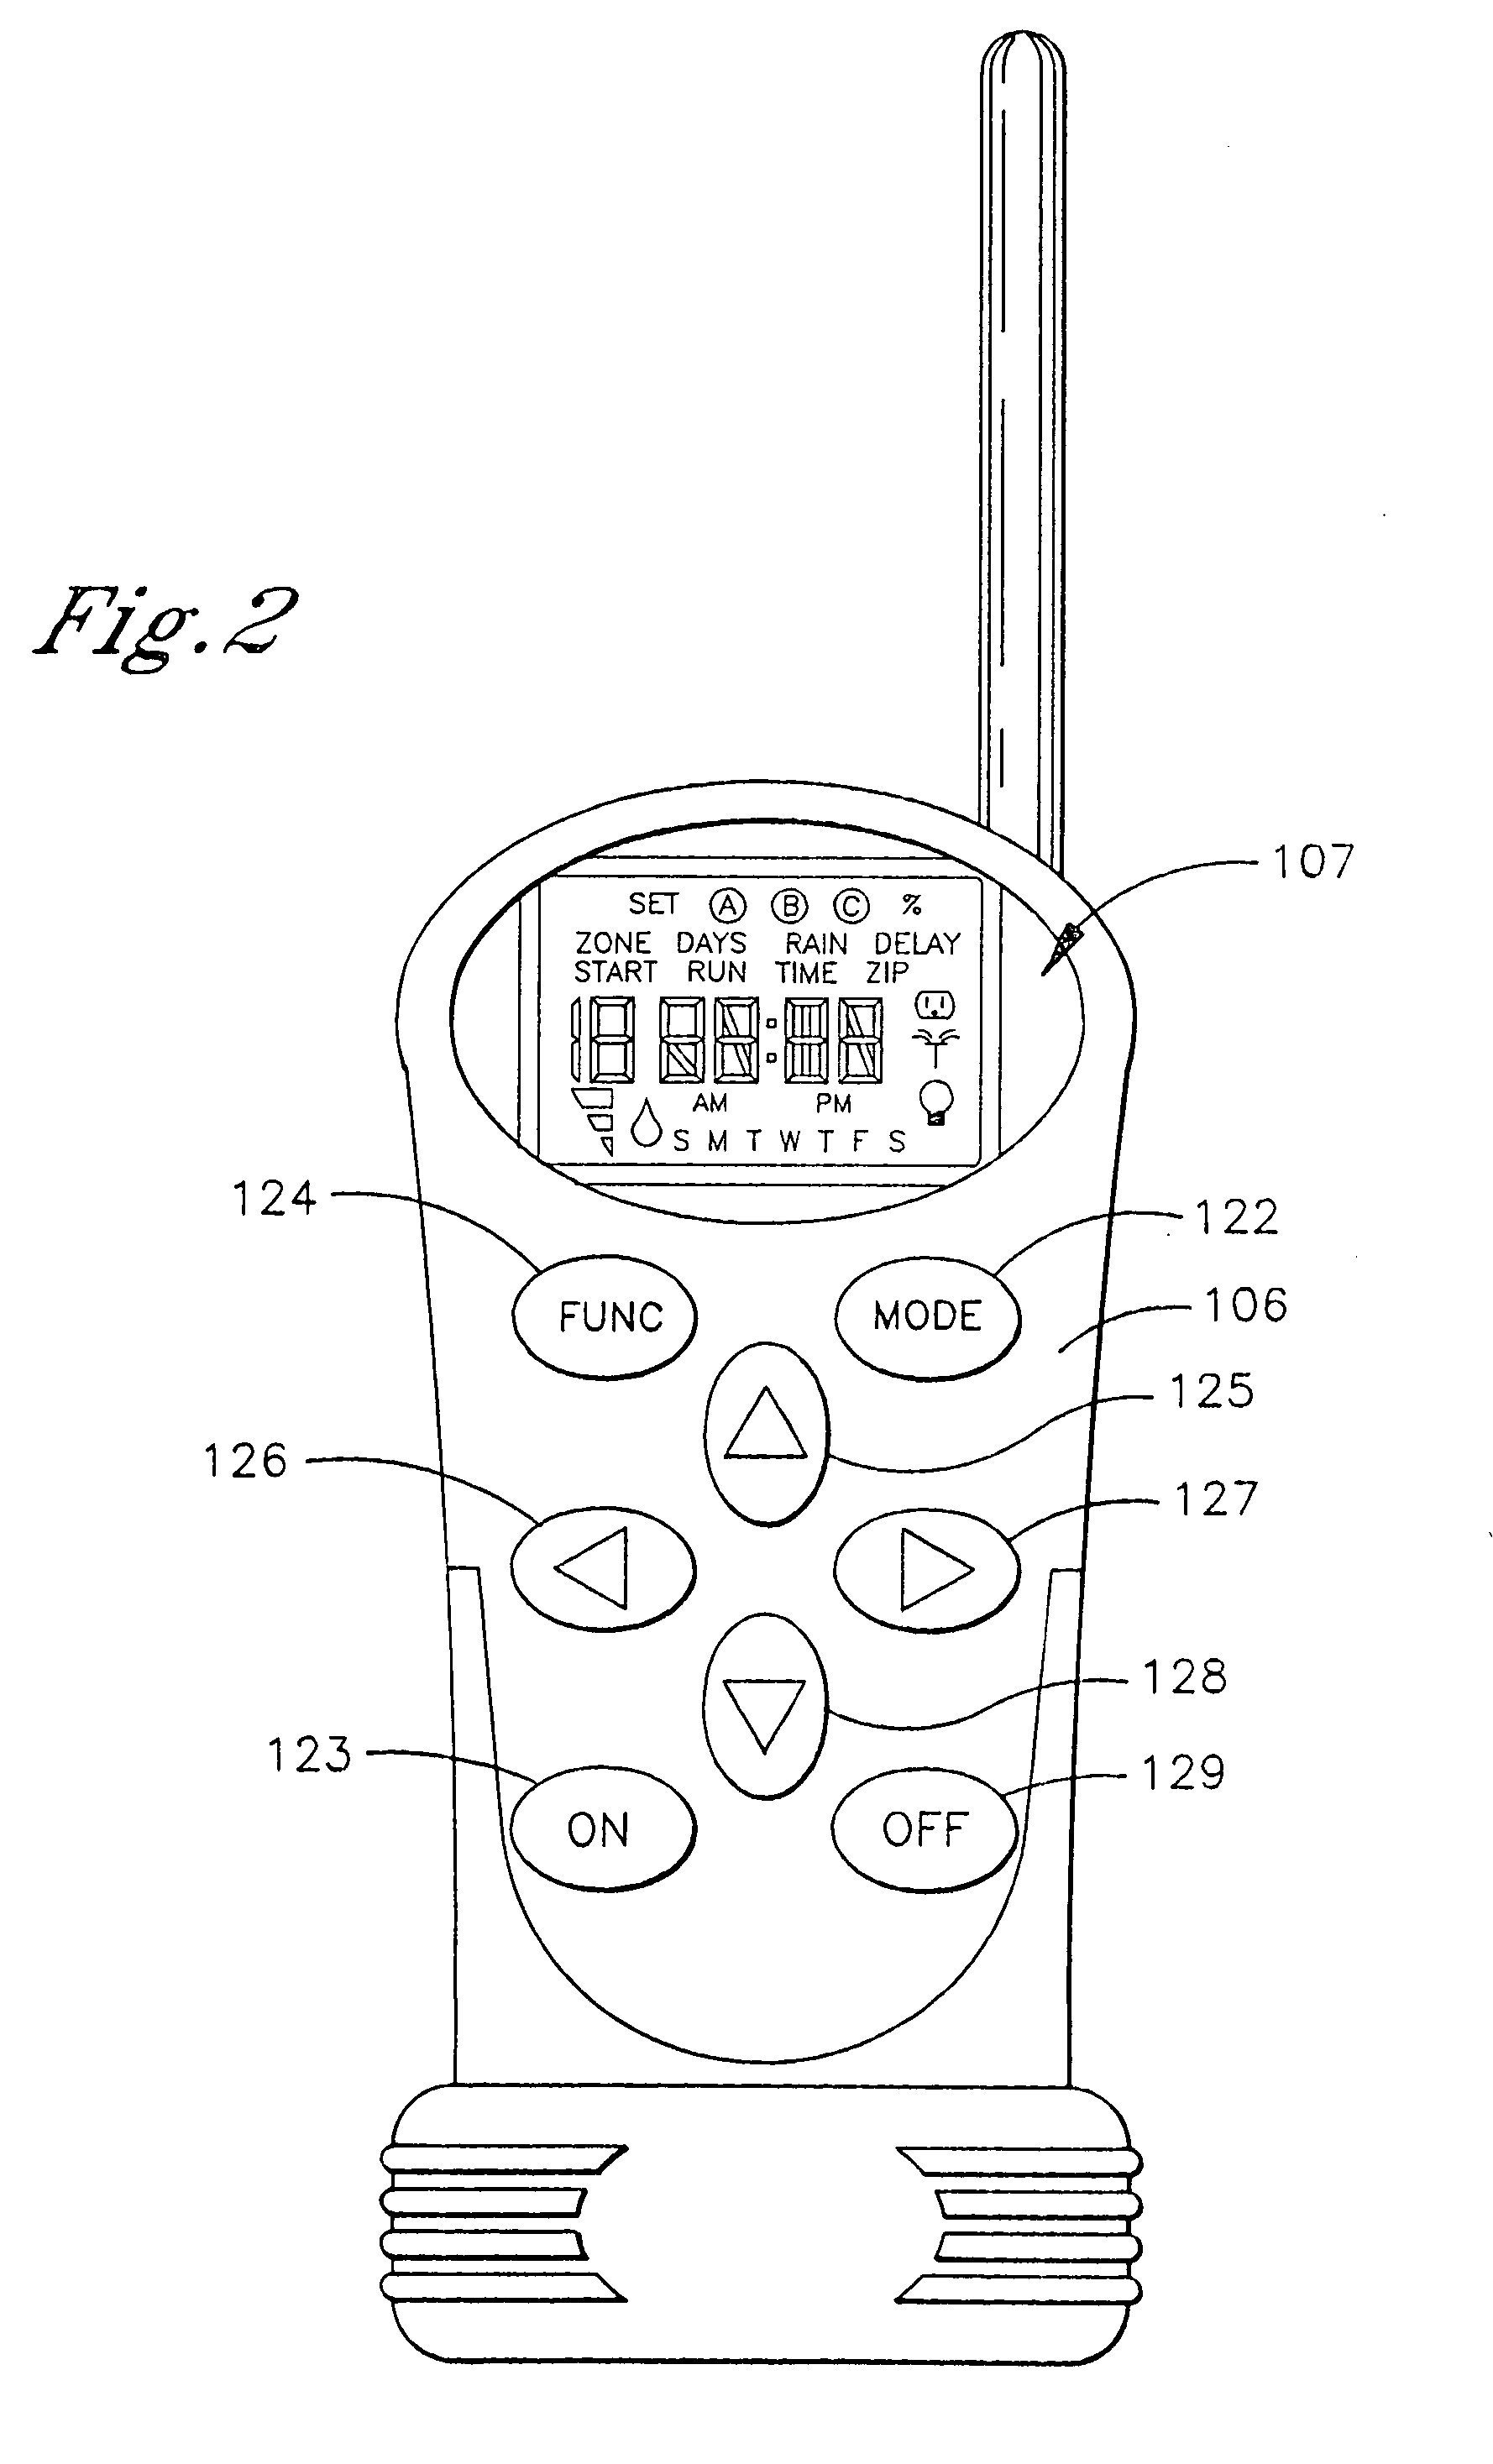 Multi-function remote controller and programmer for landscape systems